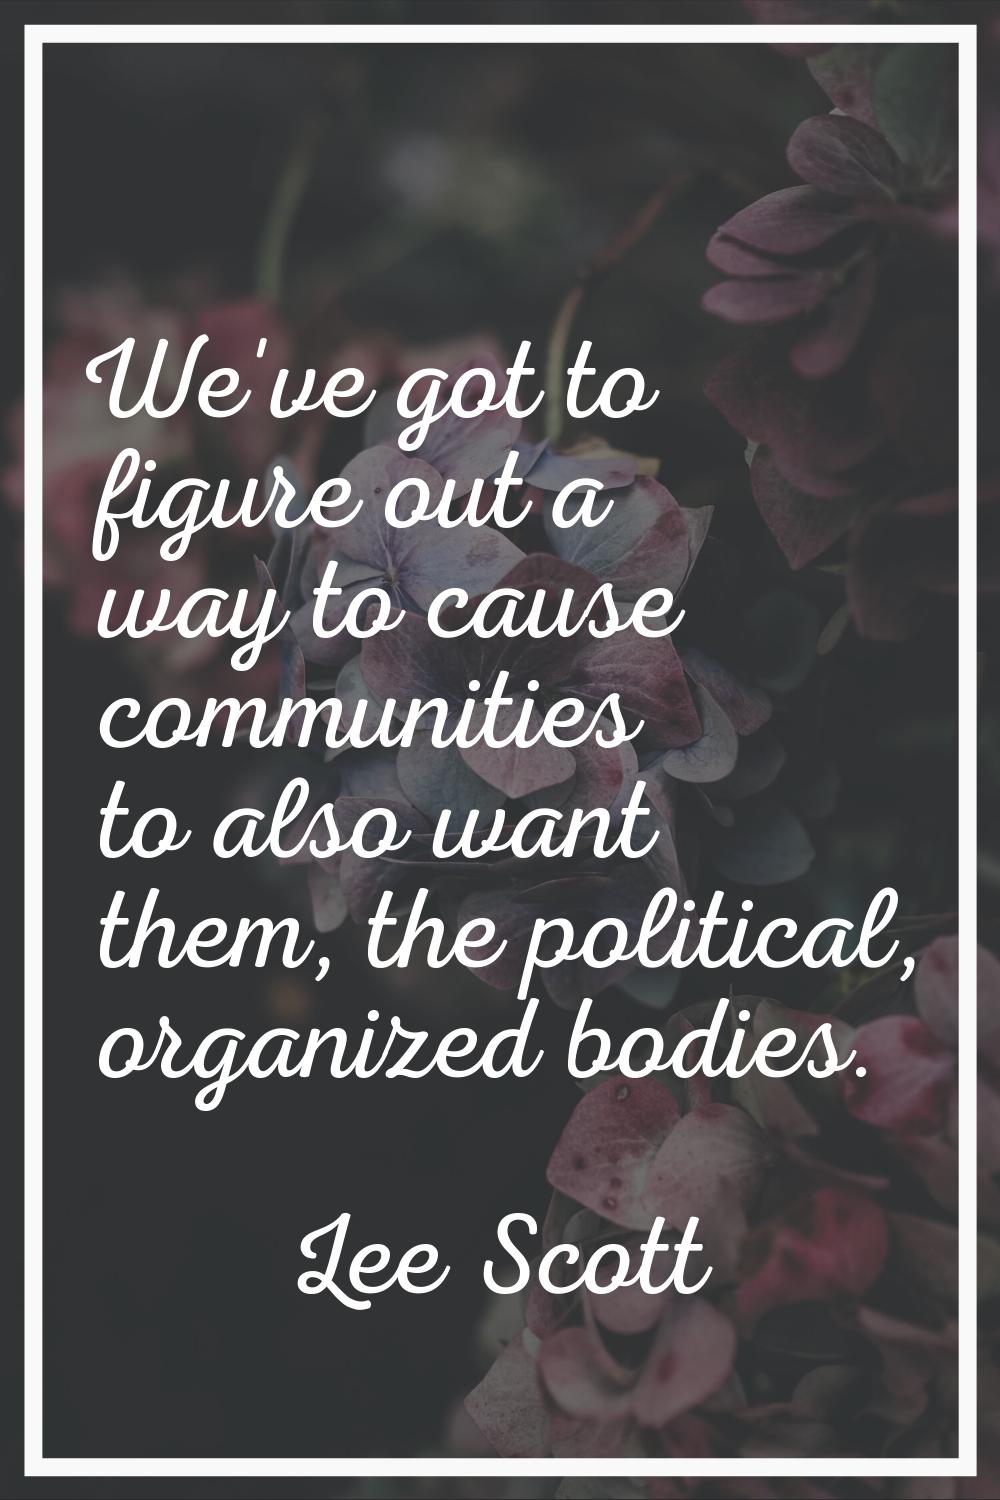 We've got to figure out a way to cause communities to also want them, the political, organized bodi